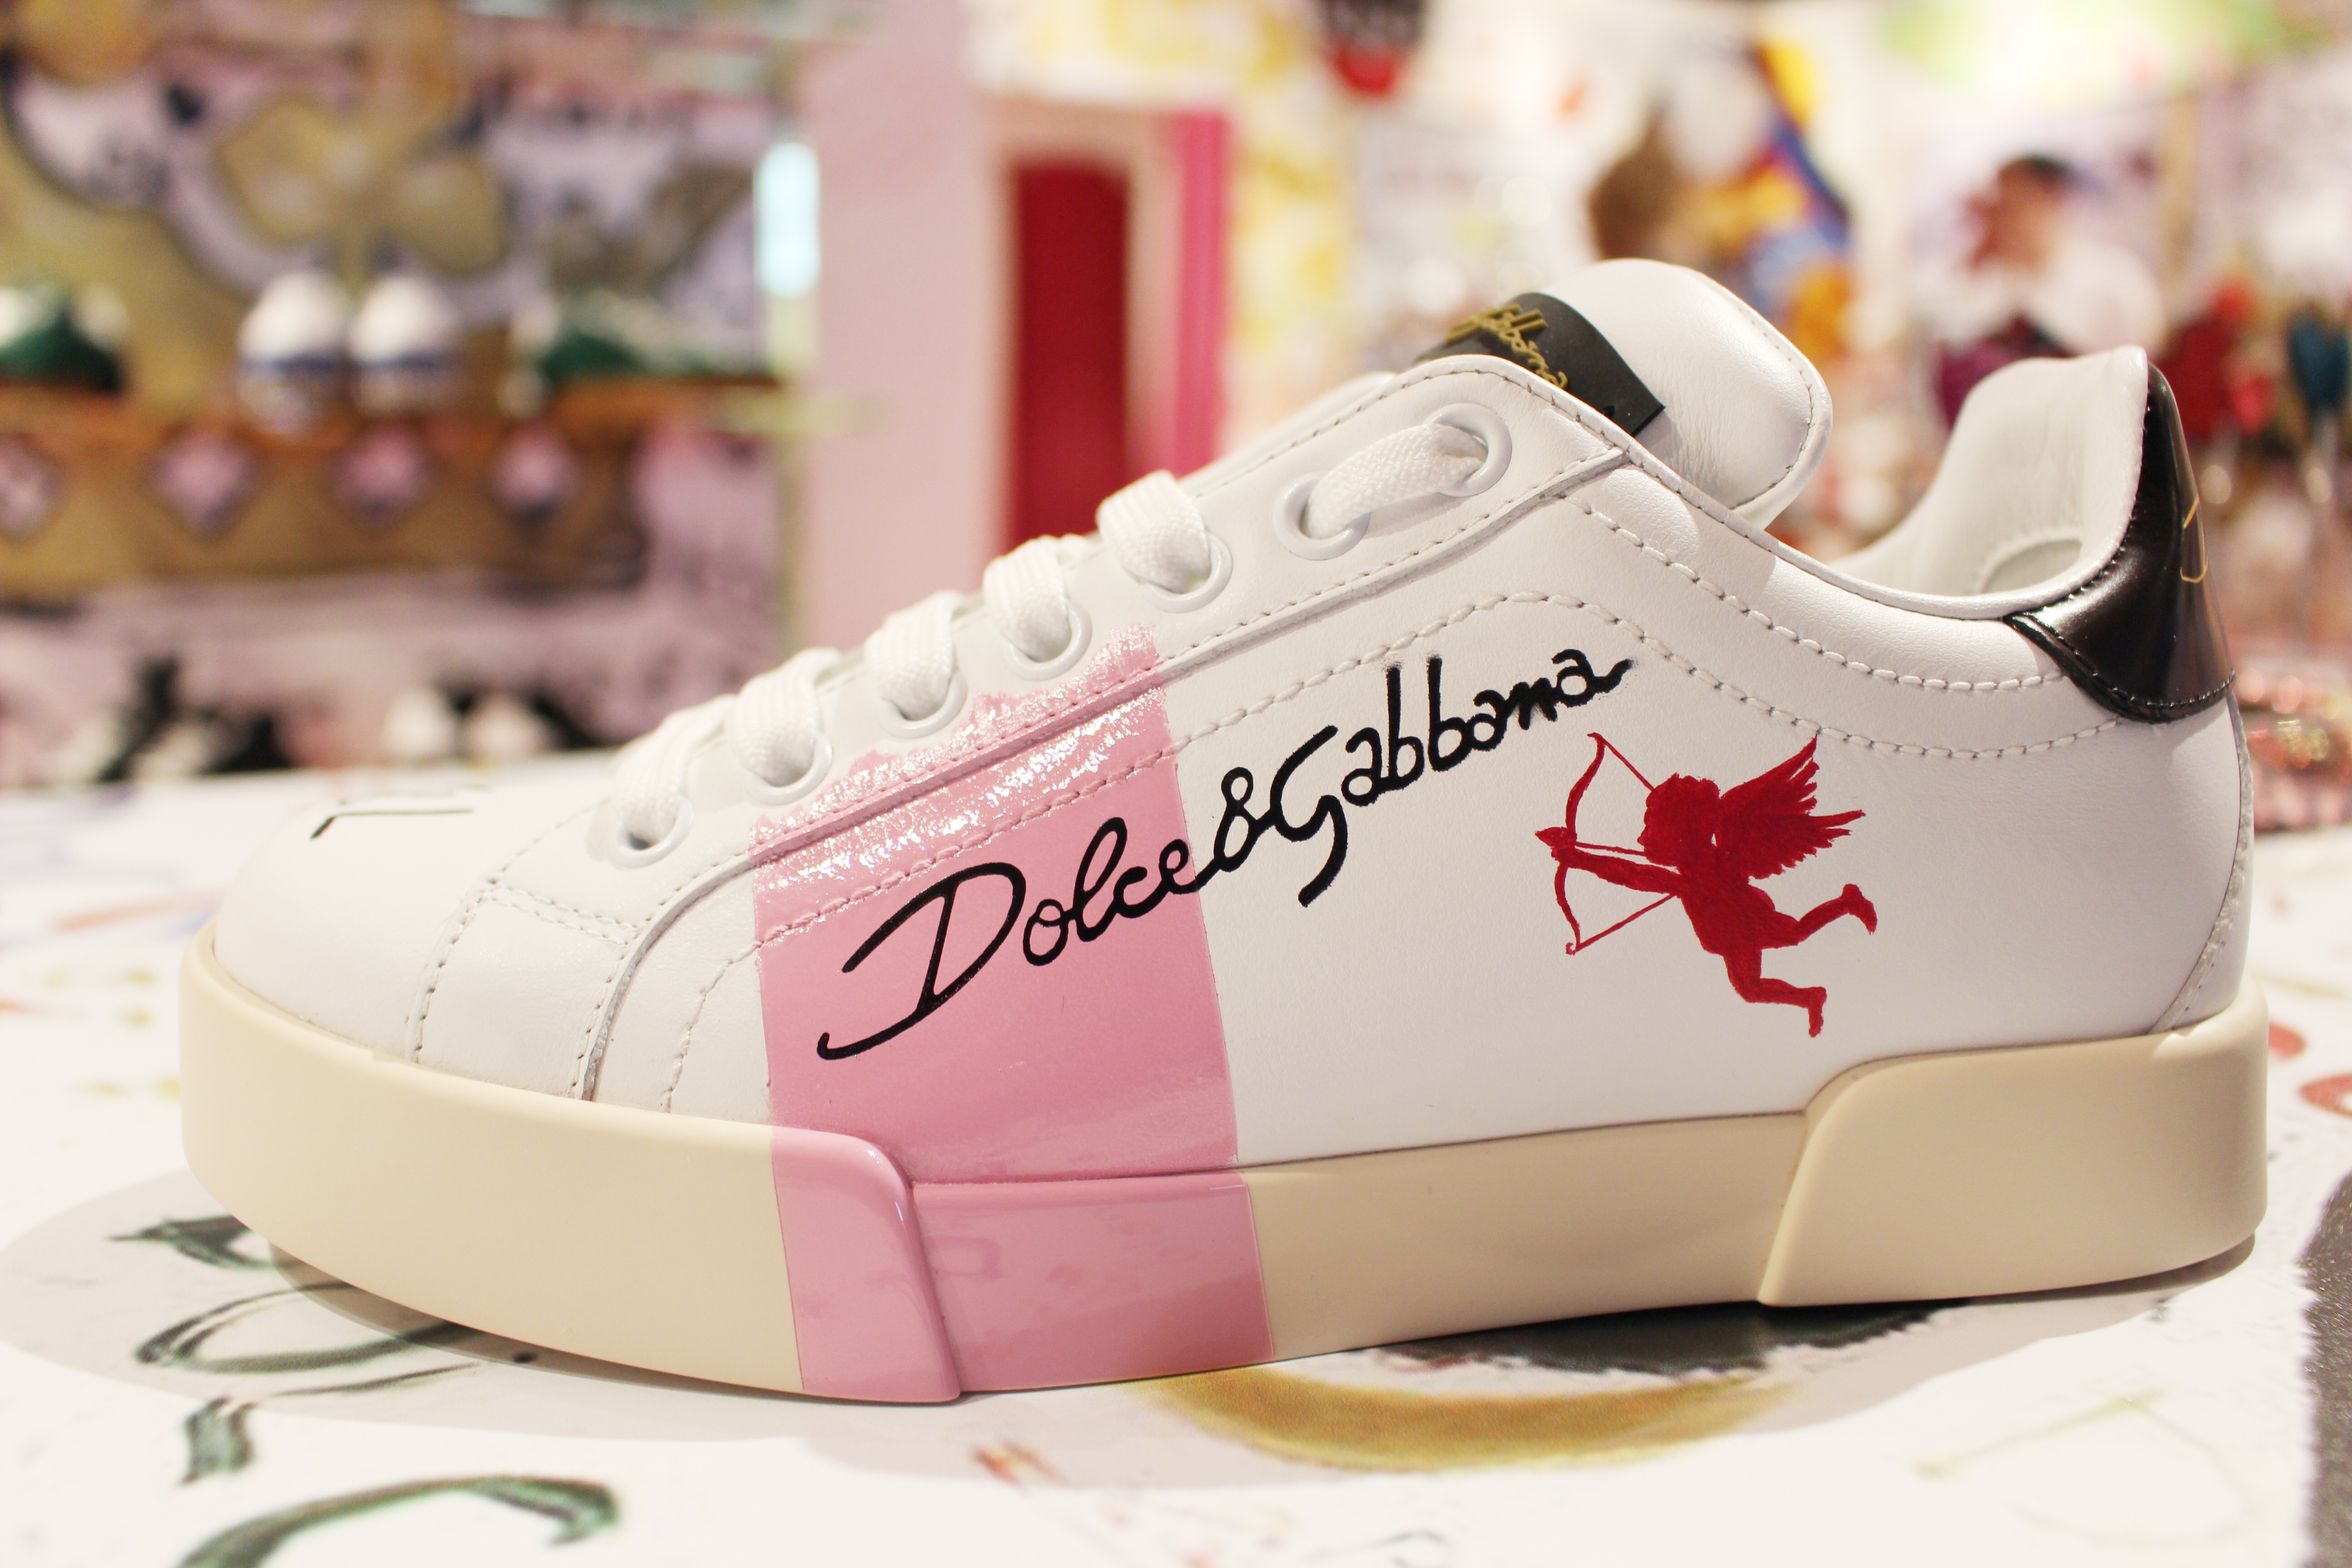 d&g customized sneakers